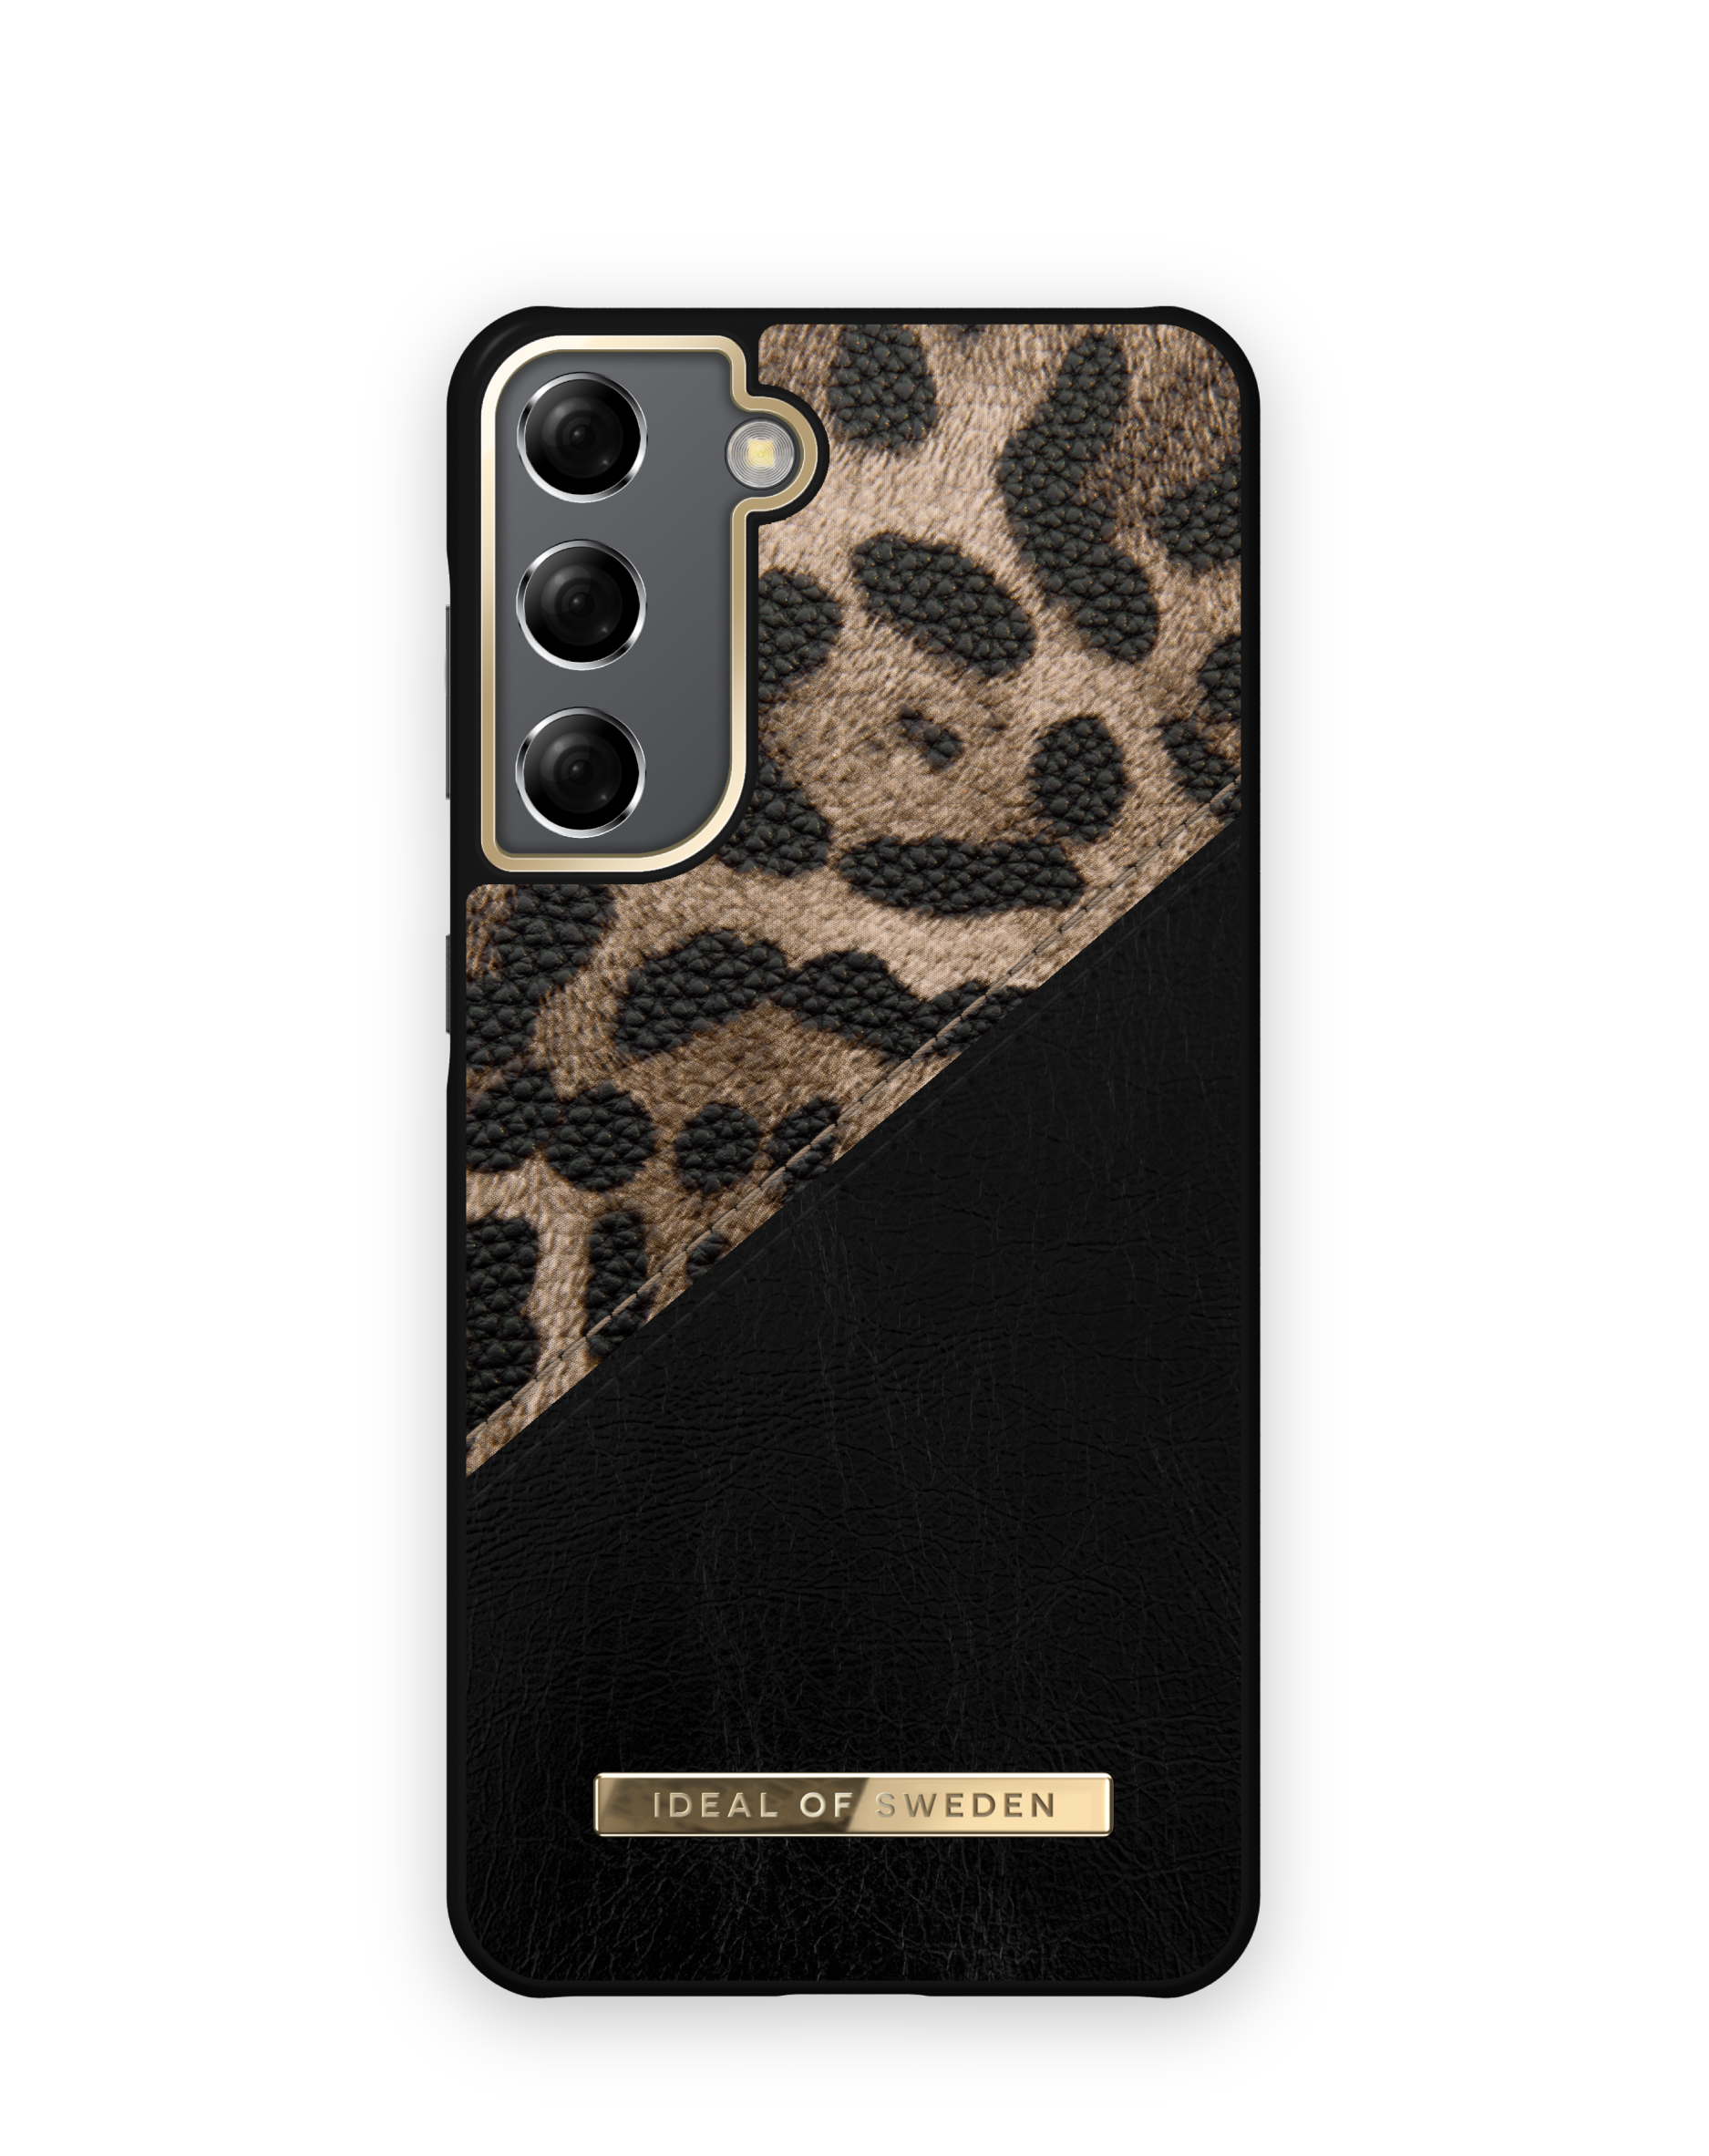 Leopard Galaxy Midnight Backcover, S21, Samsung, SWEDEN OF IDEAL IDACAW21-S21-330,